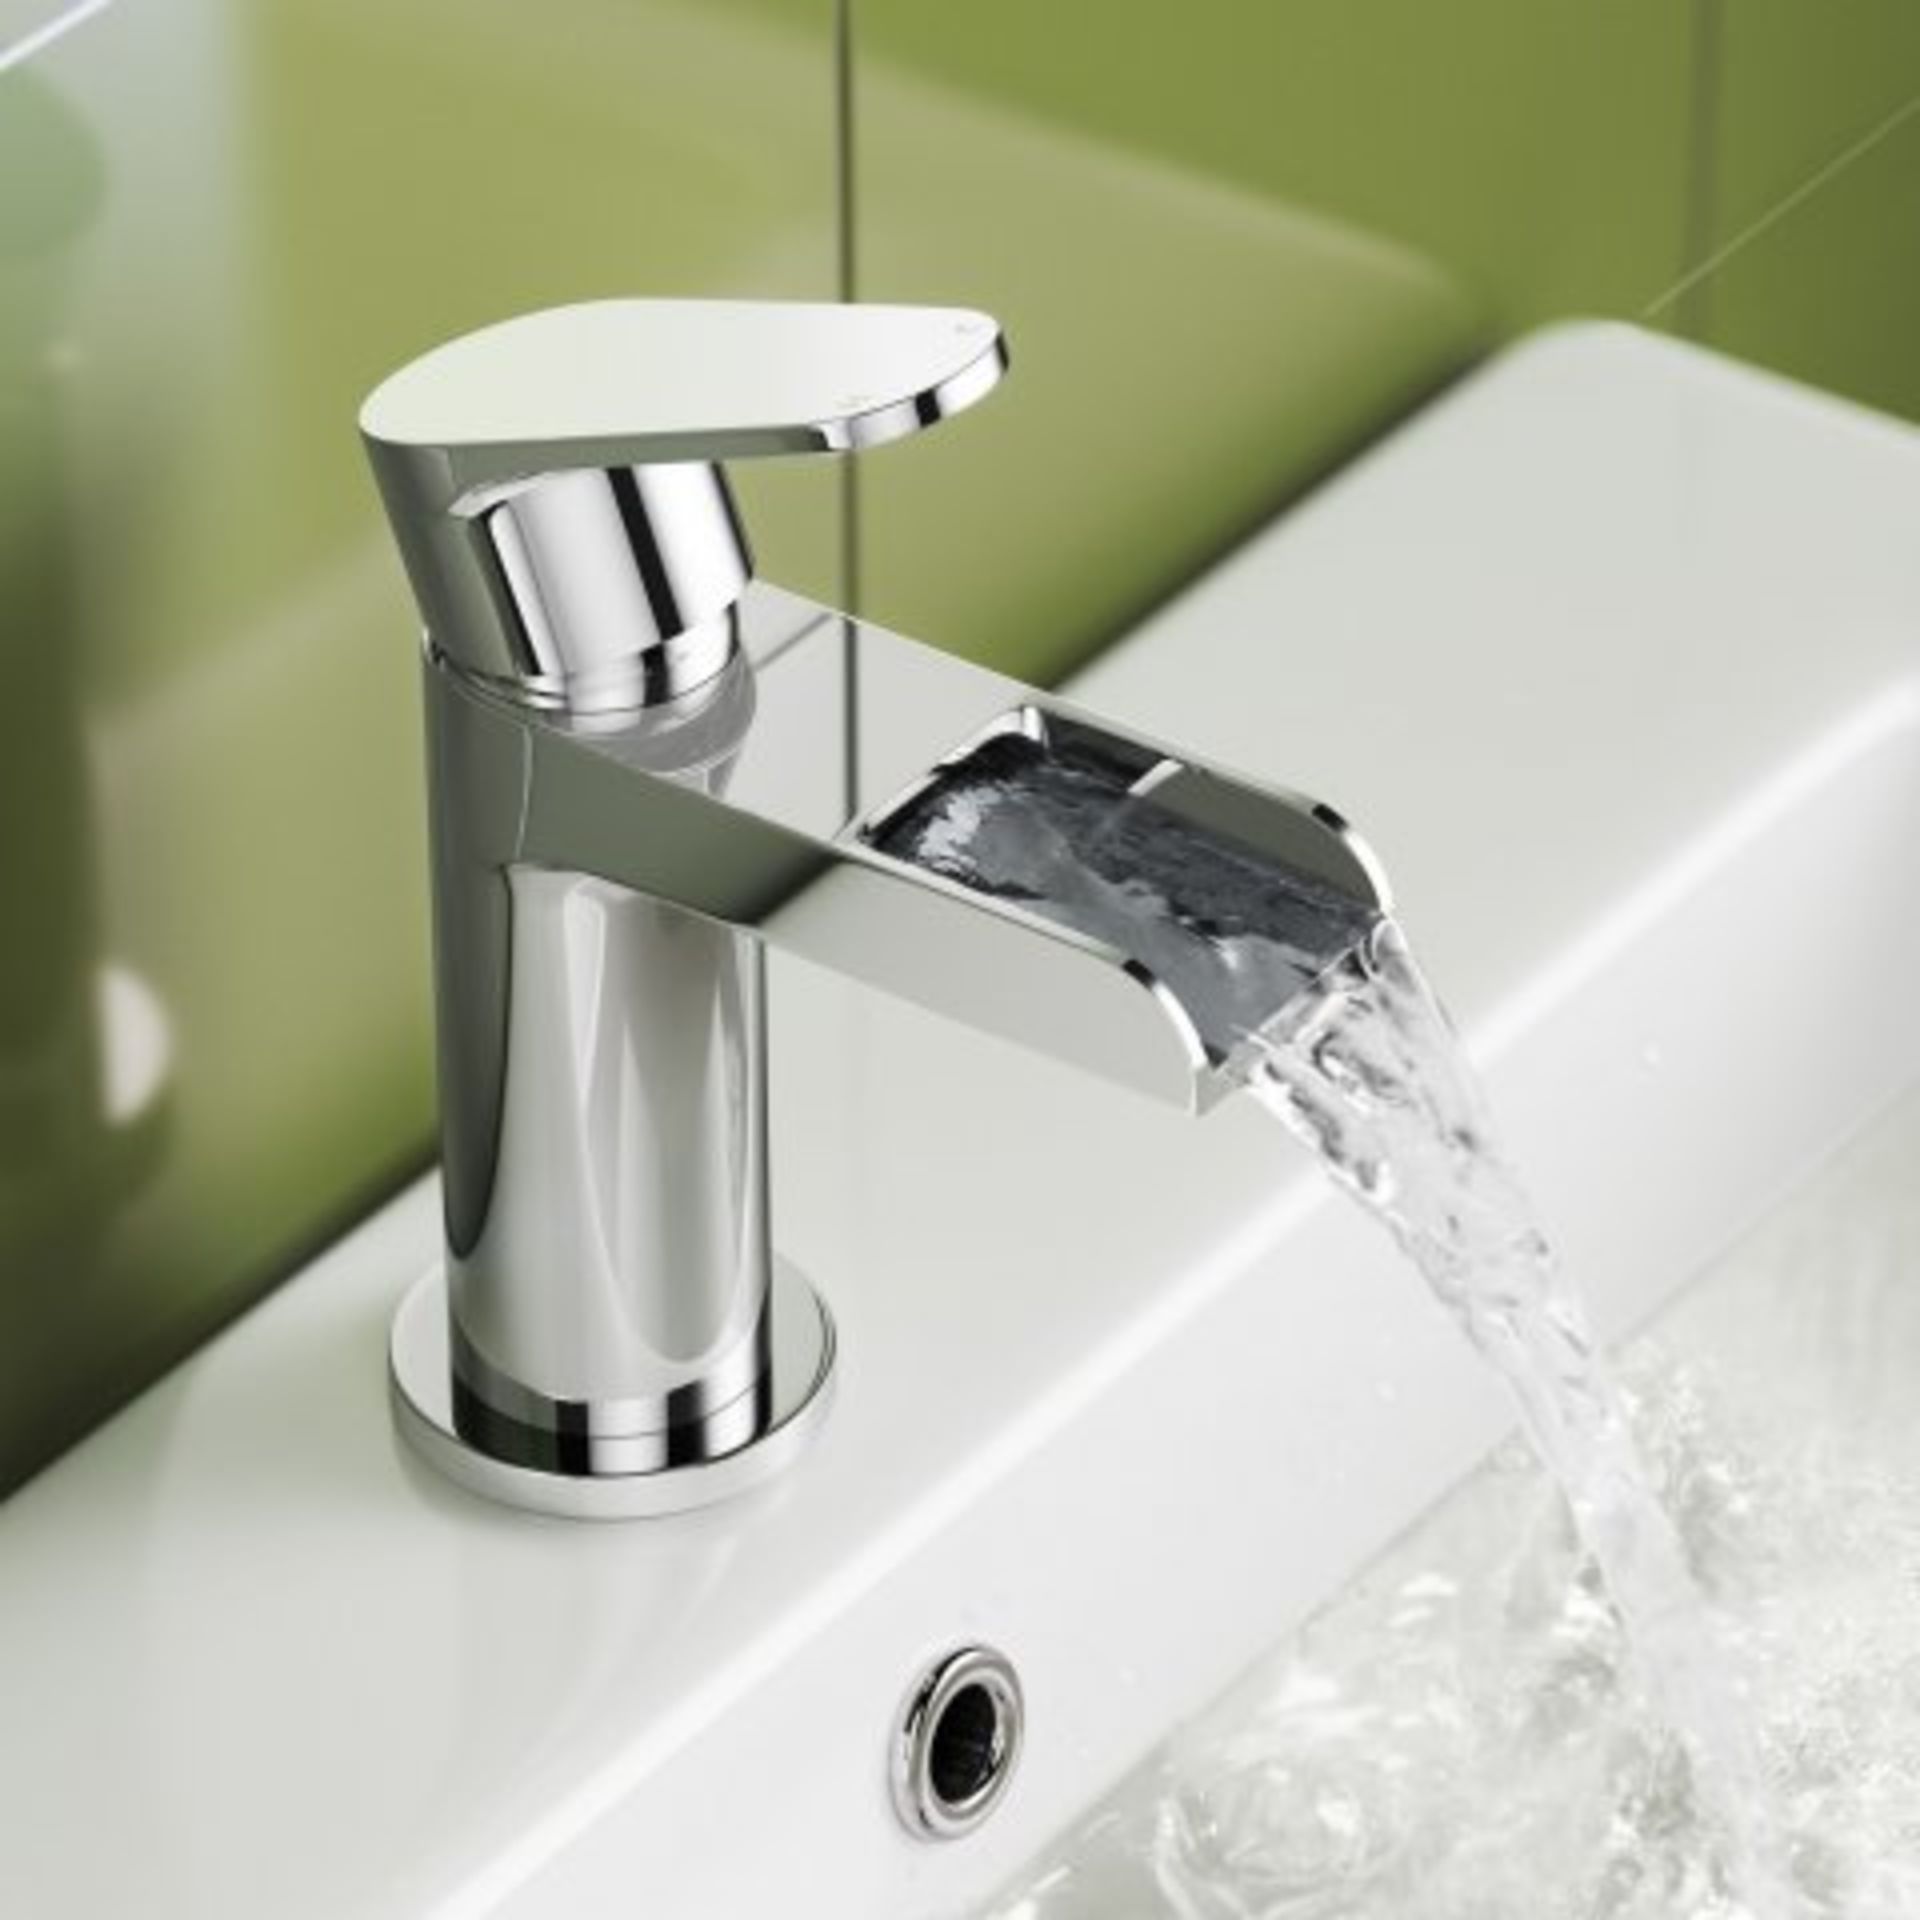 (REF40) Cela Waterfall Basin Mixer Tap Presenting a contemporary design, this solid brass tap has